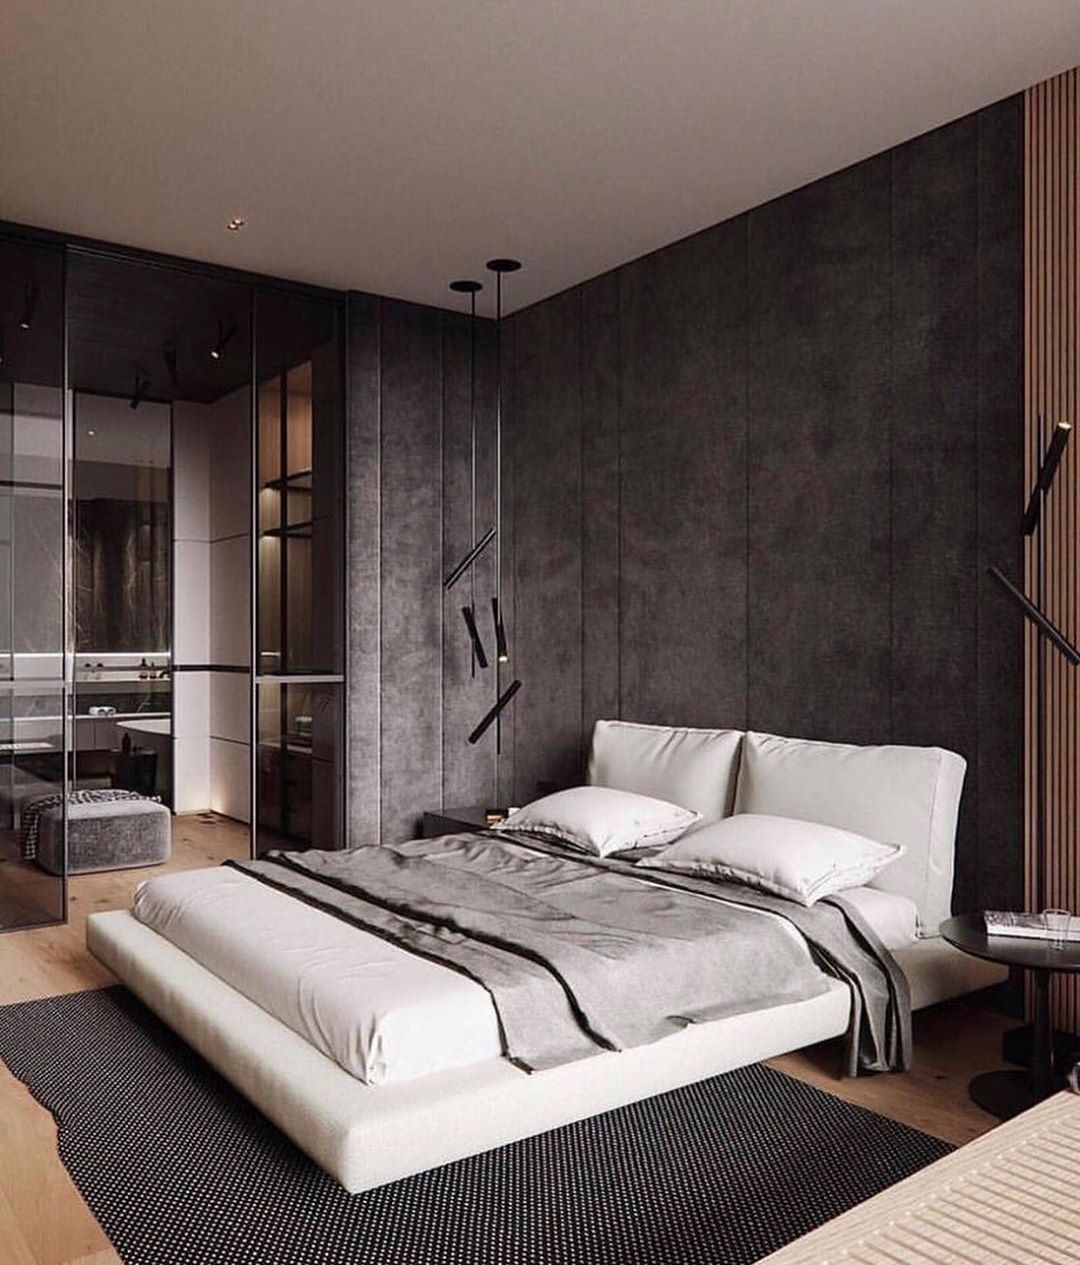 Bedroom designed in Modern style with gray walls and a bed with white sheets on a platform frame. Photo by Instagram user @architect_mustafayev